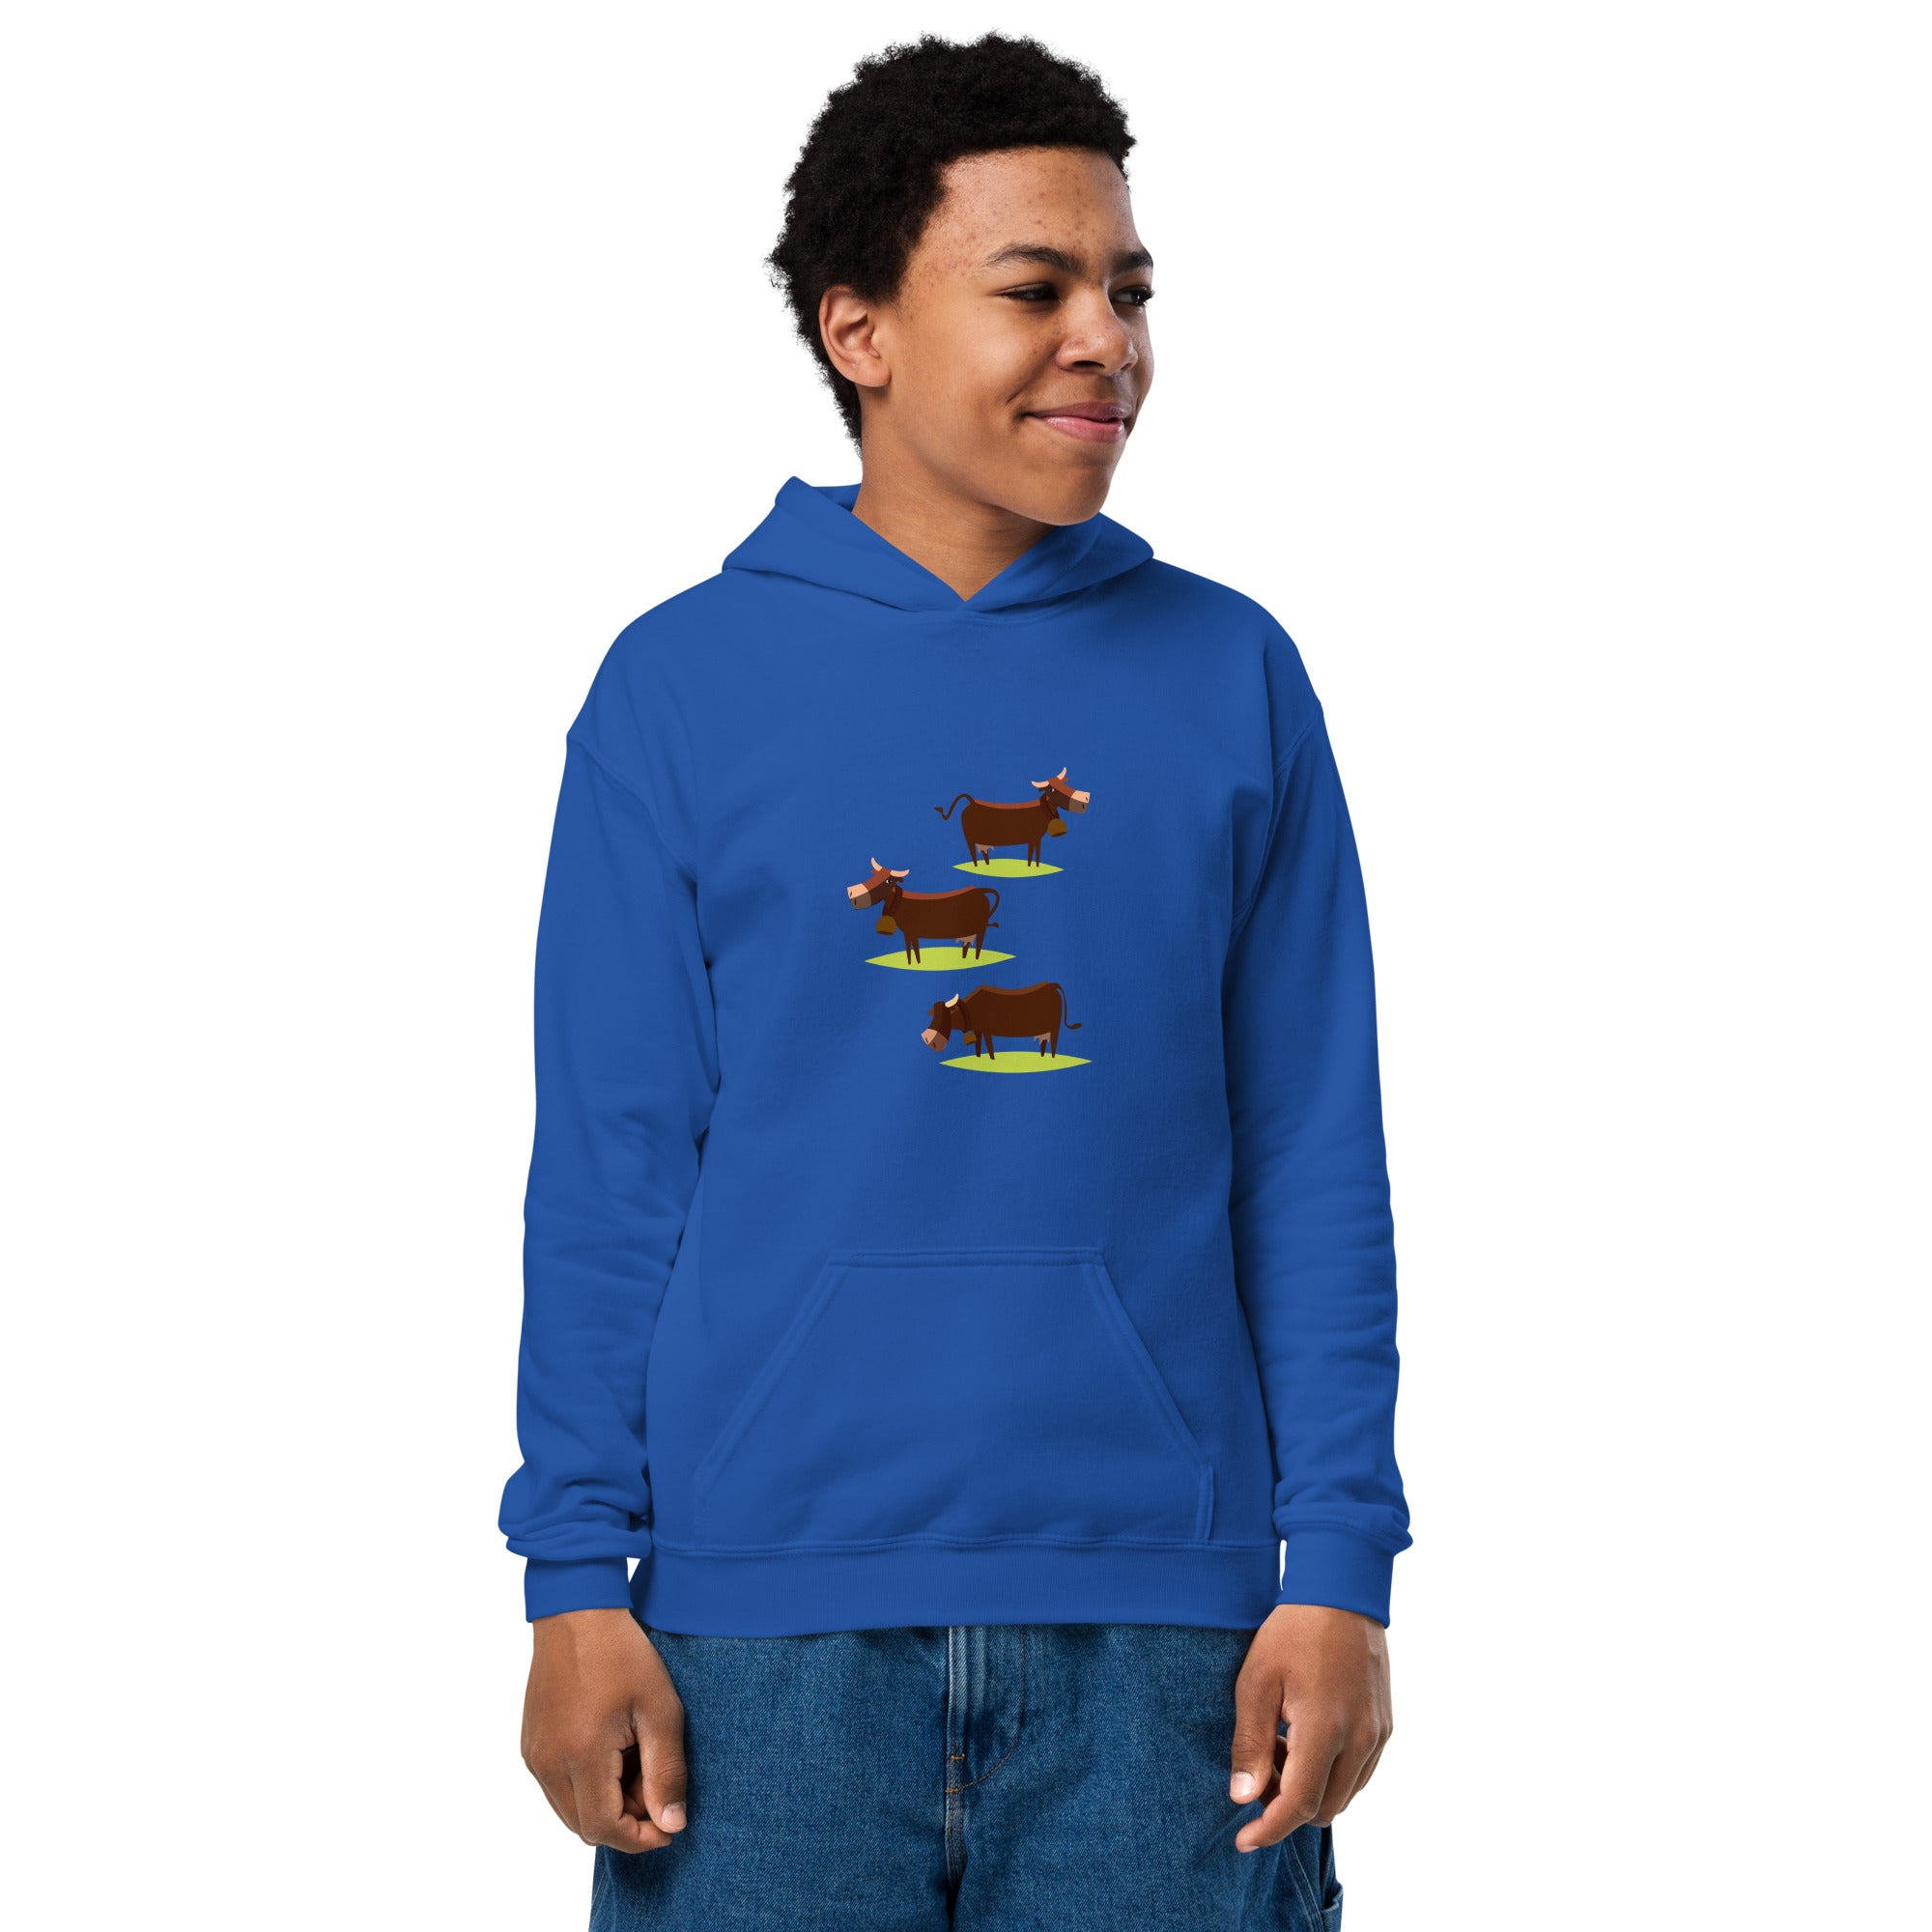 Youth heavy blend hoodie The Three Cows